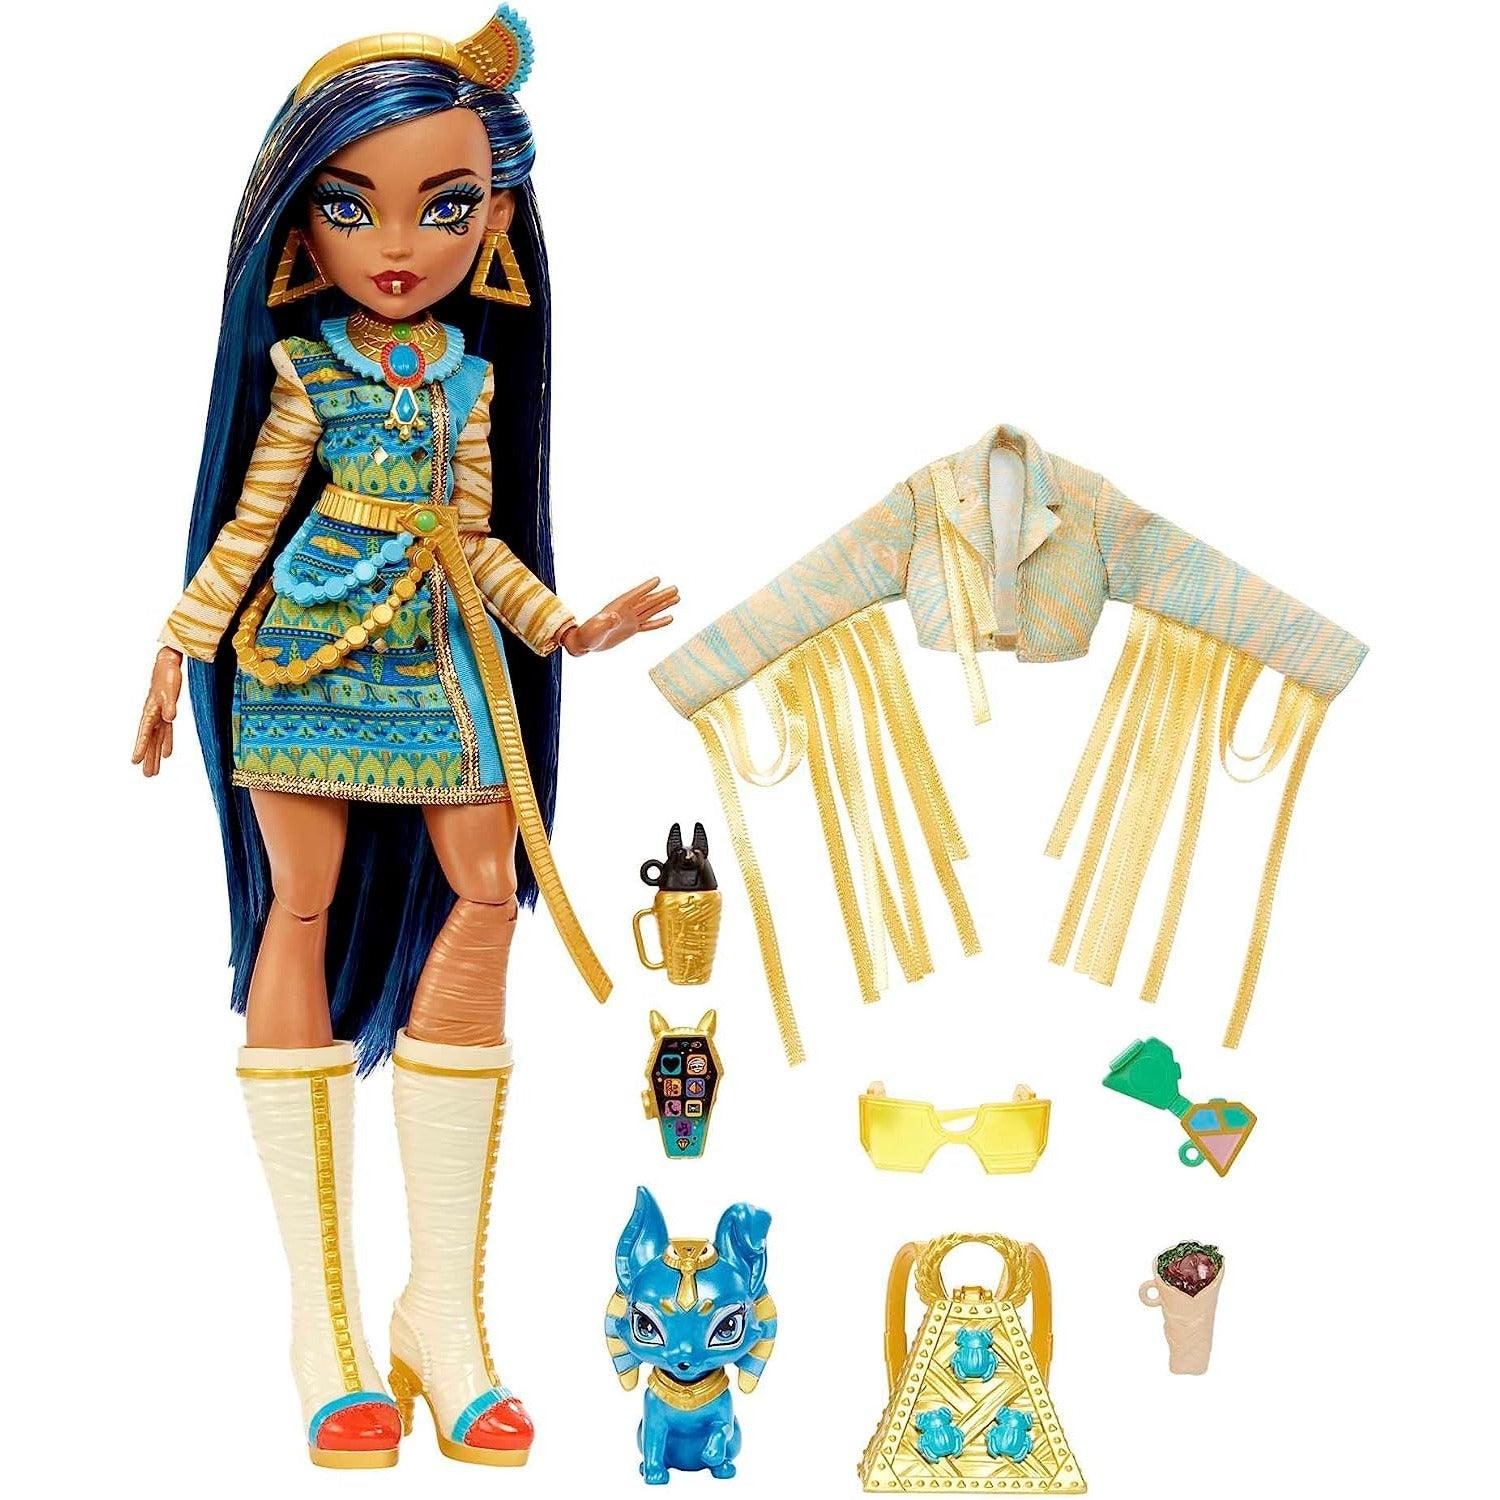 Mattel Monster High Cleo De Nile Fashion Doll with Blue Streaked Hair, Signature Look, Accessories & Pet Dog - BumbleToys - 5-7 Years, Dolls, Fashion Dolls & Accessories, Girls, OXE, Pre-Order